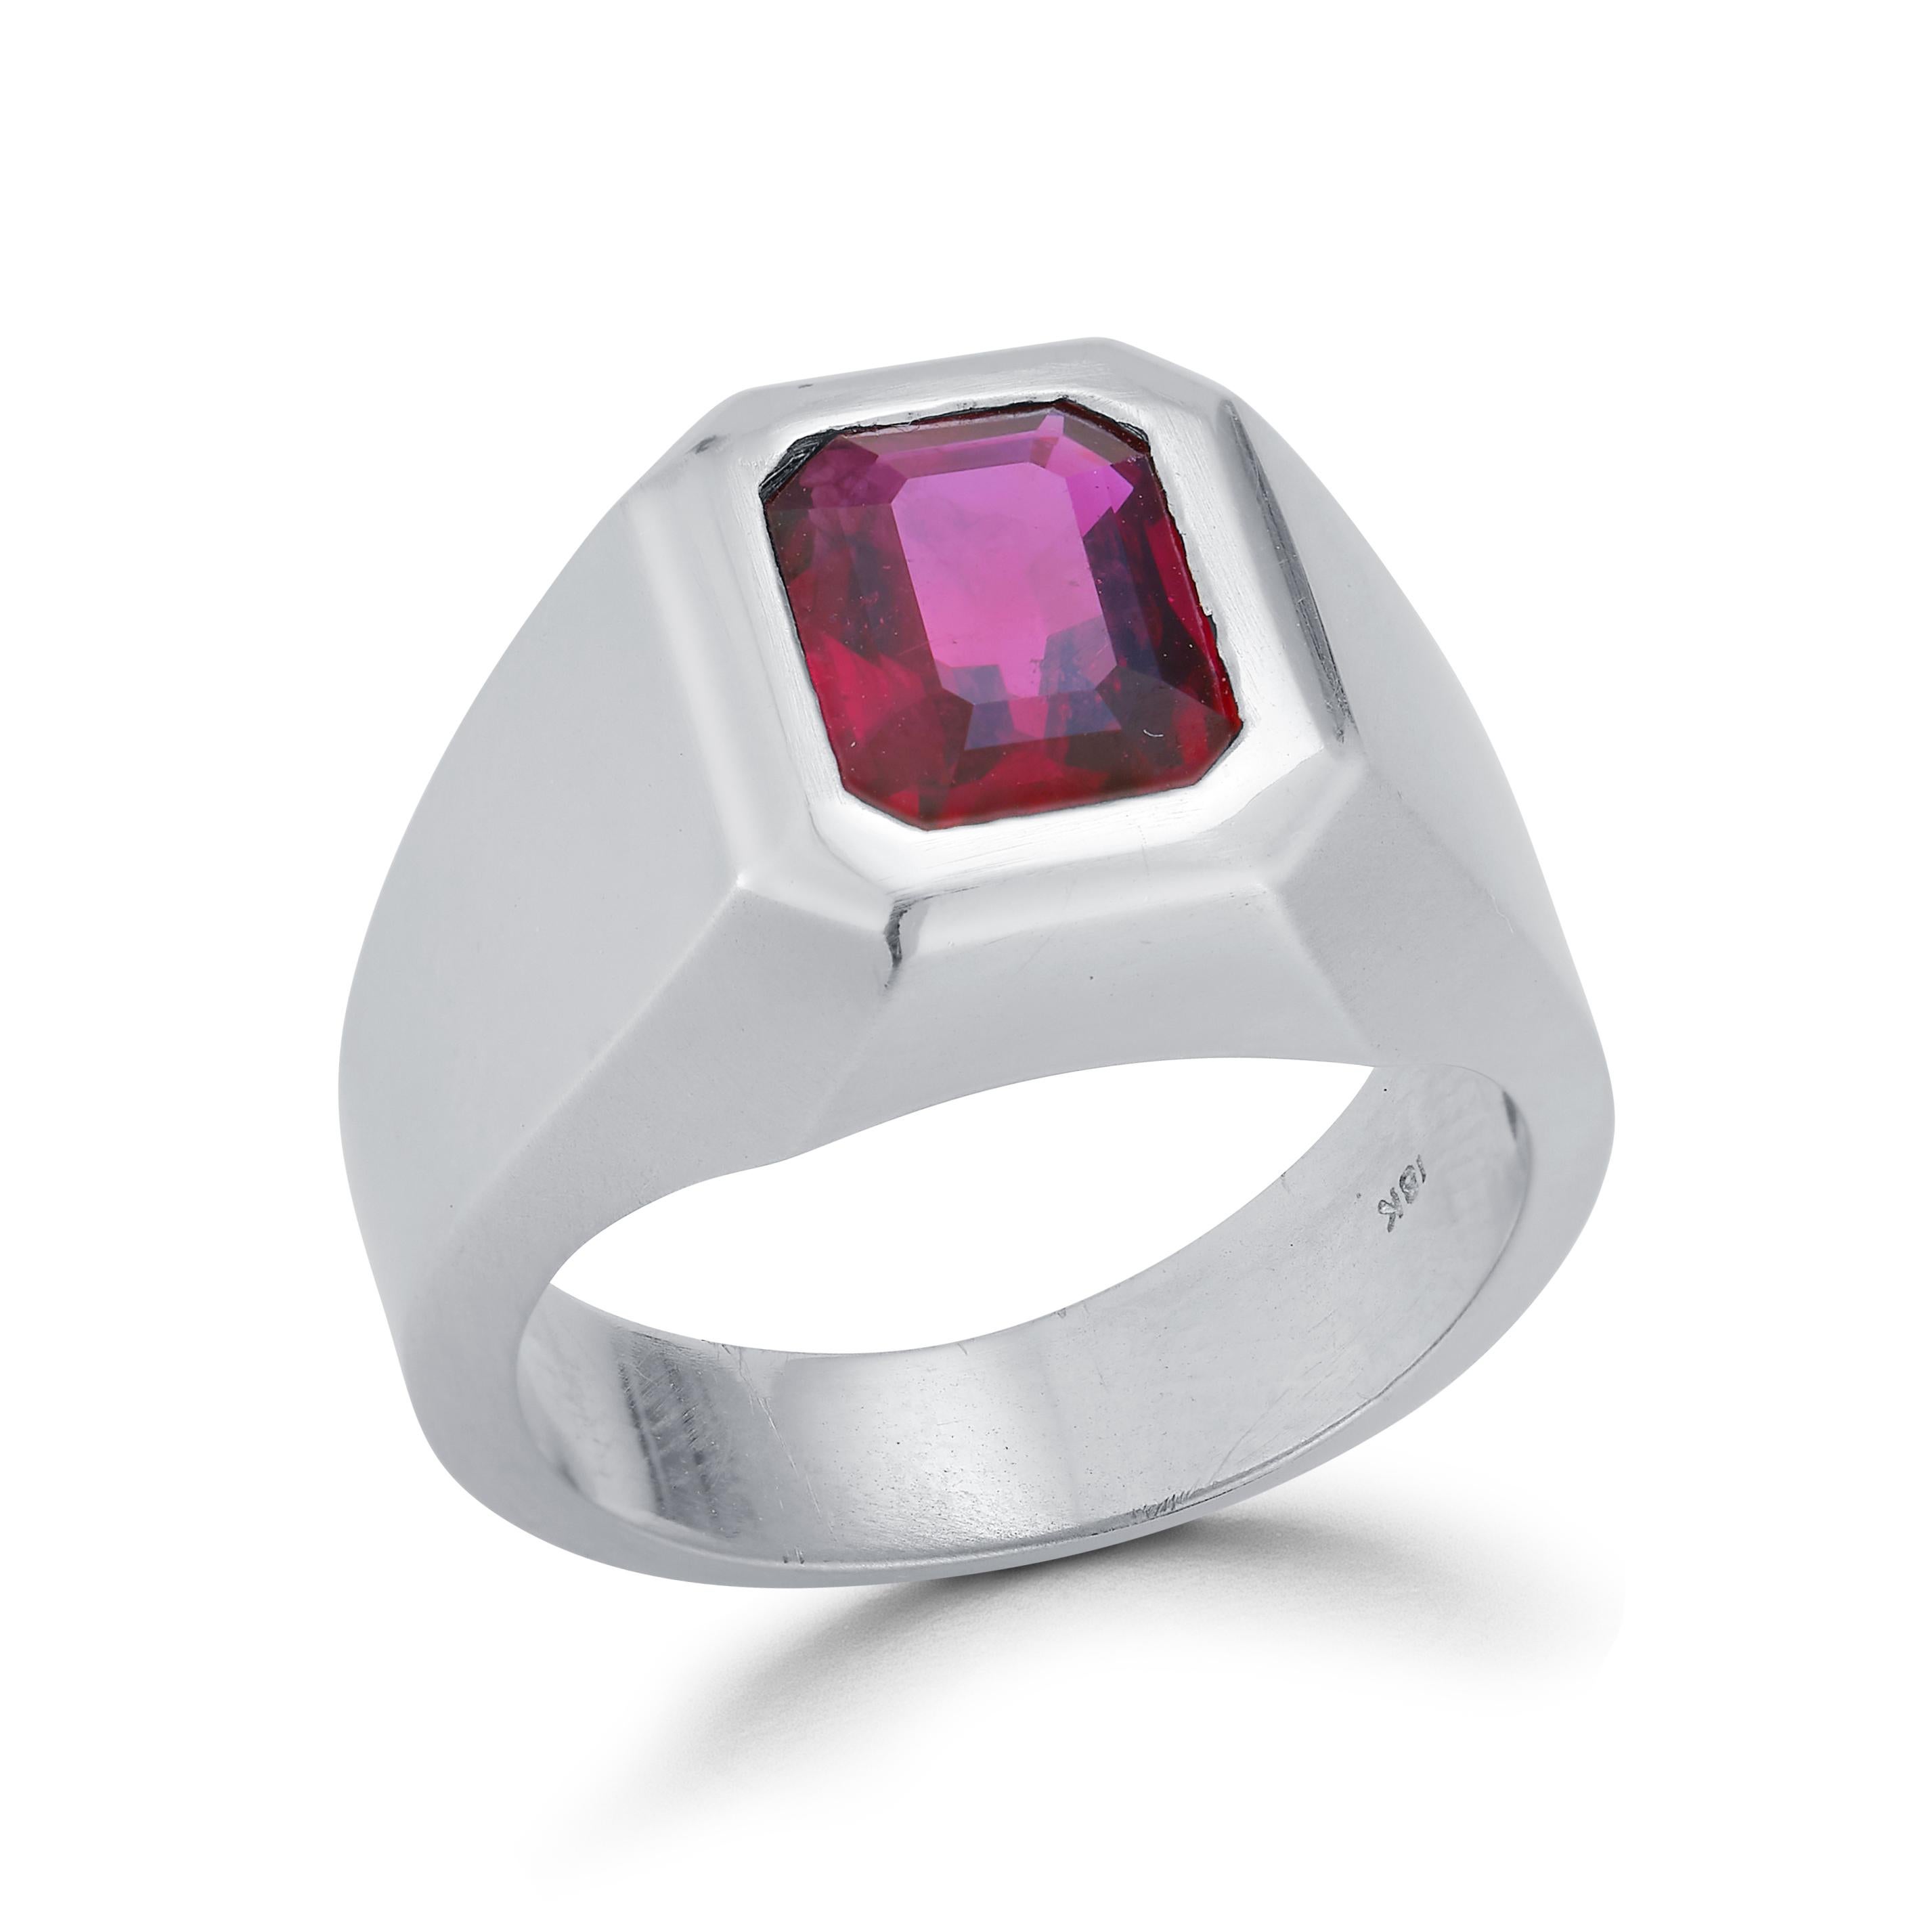 Men's Solitaire Ruby Ring, set in 18K matte White Gold
With AGL Certificate 
Ruby approximately 2 carats
Ring Size: 7.5
Resizable free of charge
